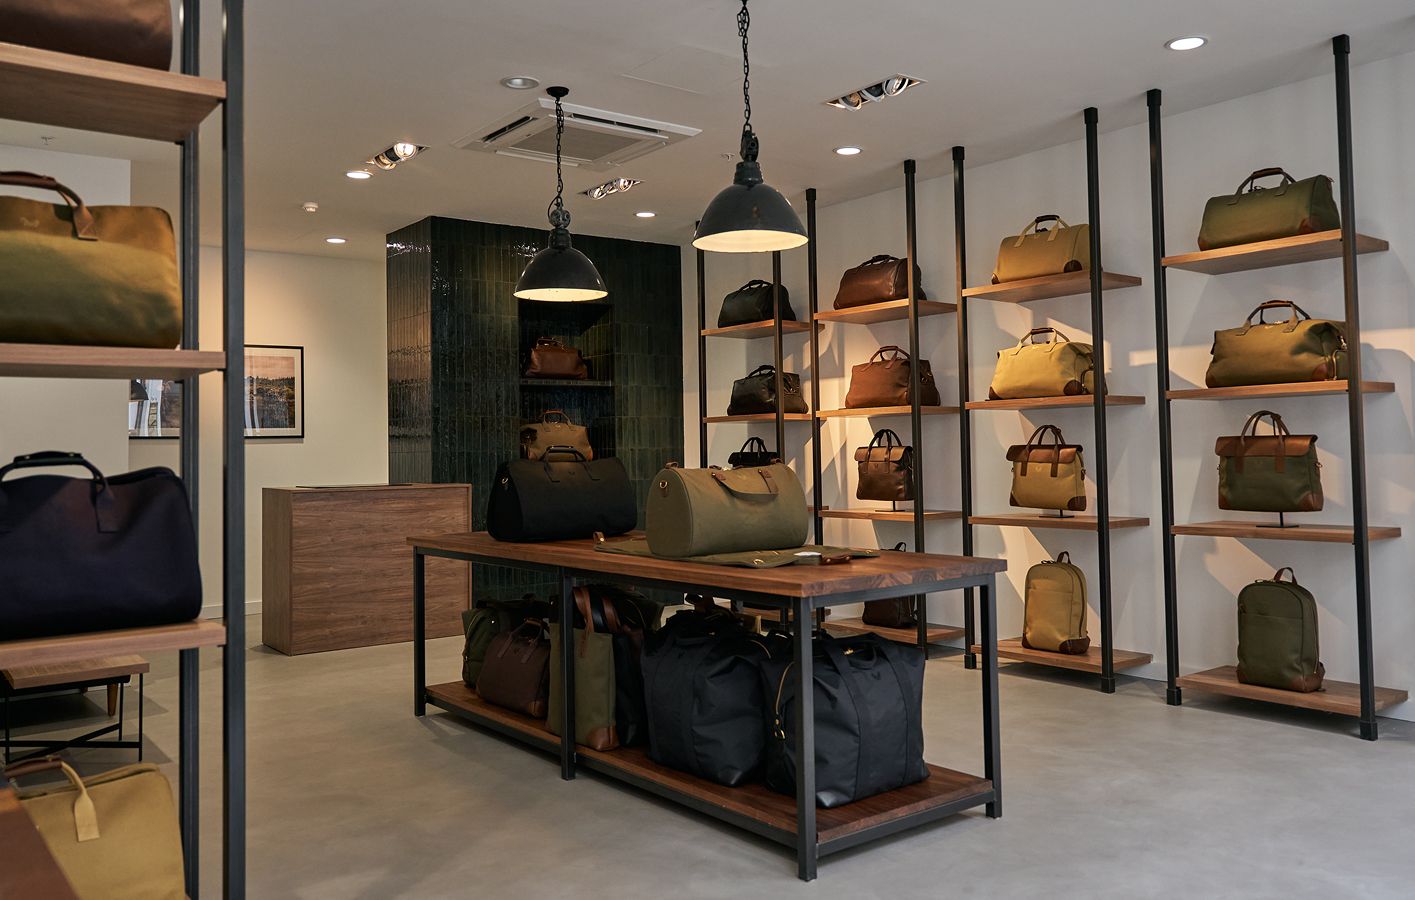 Well-crafted bags Bennett Winch tailors for certain occasions inside the brand's new flagship store on Savile Row